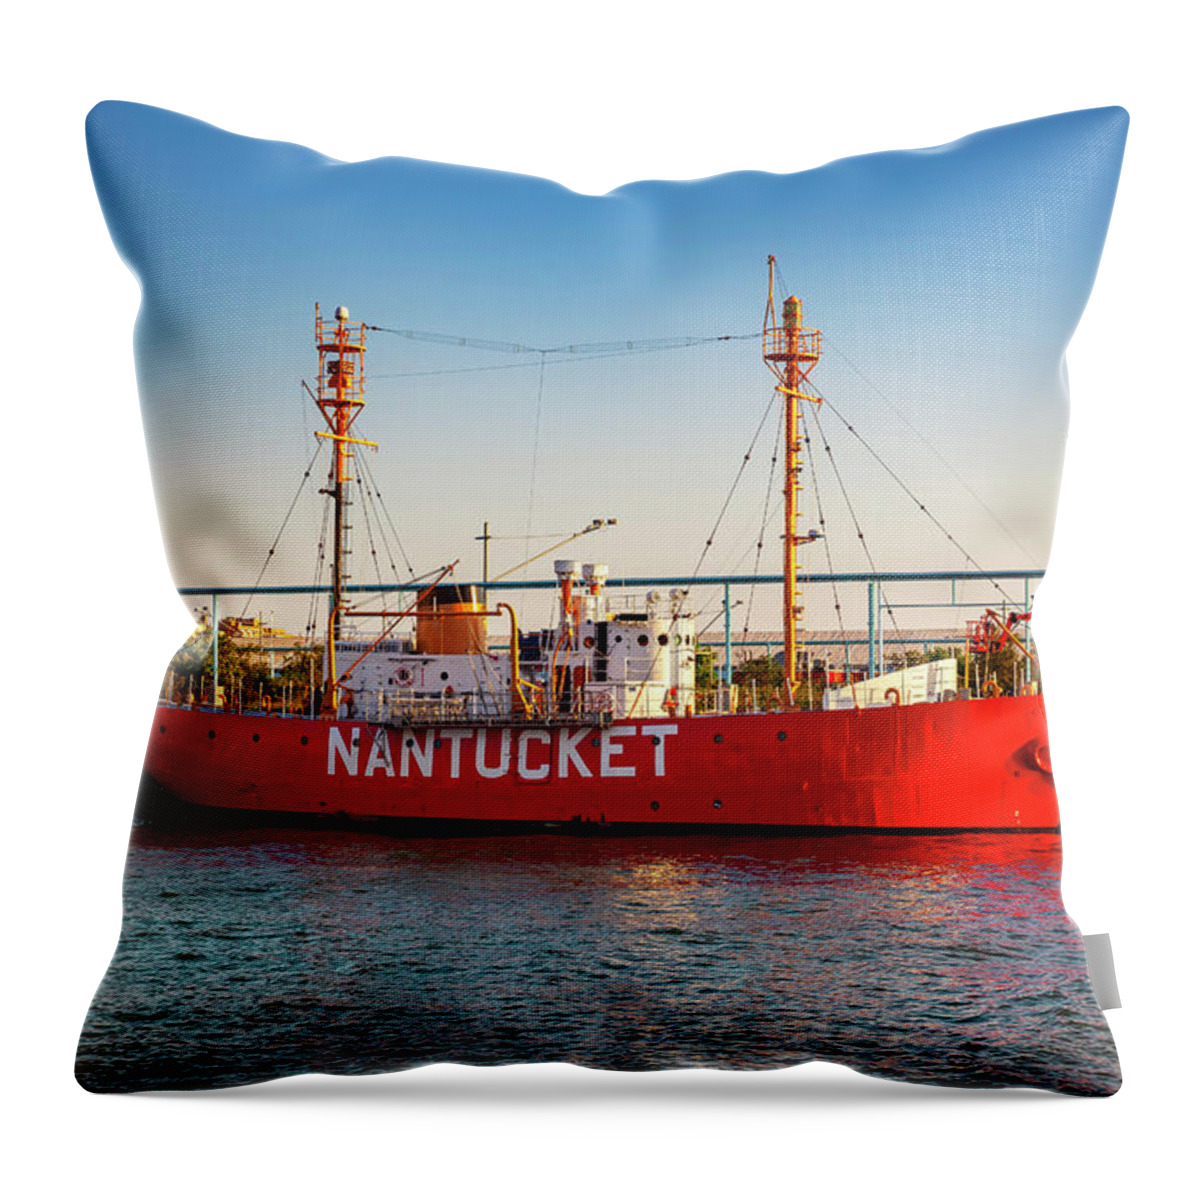 Estock Throw Pillow featuring the digital art Nantucket Lightship In Brooklyn Ny by Lumiere